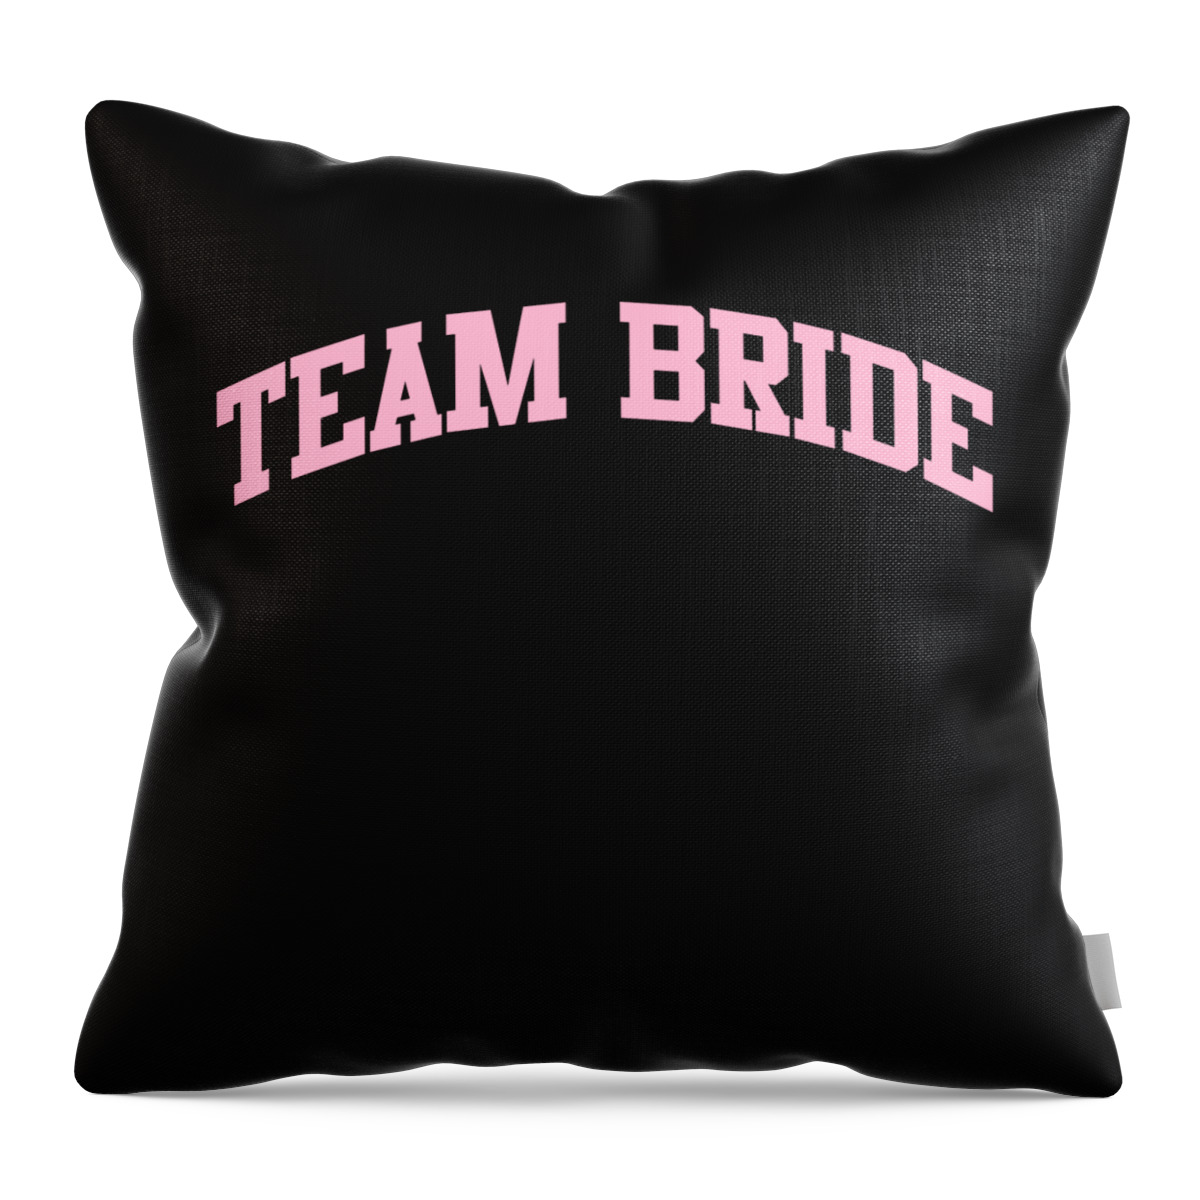 Bridal Party Throw Pillow featuring the digital art Team Bride Bridal Party by Flippin Sweet Gear